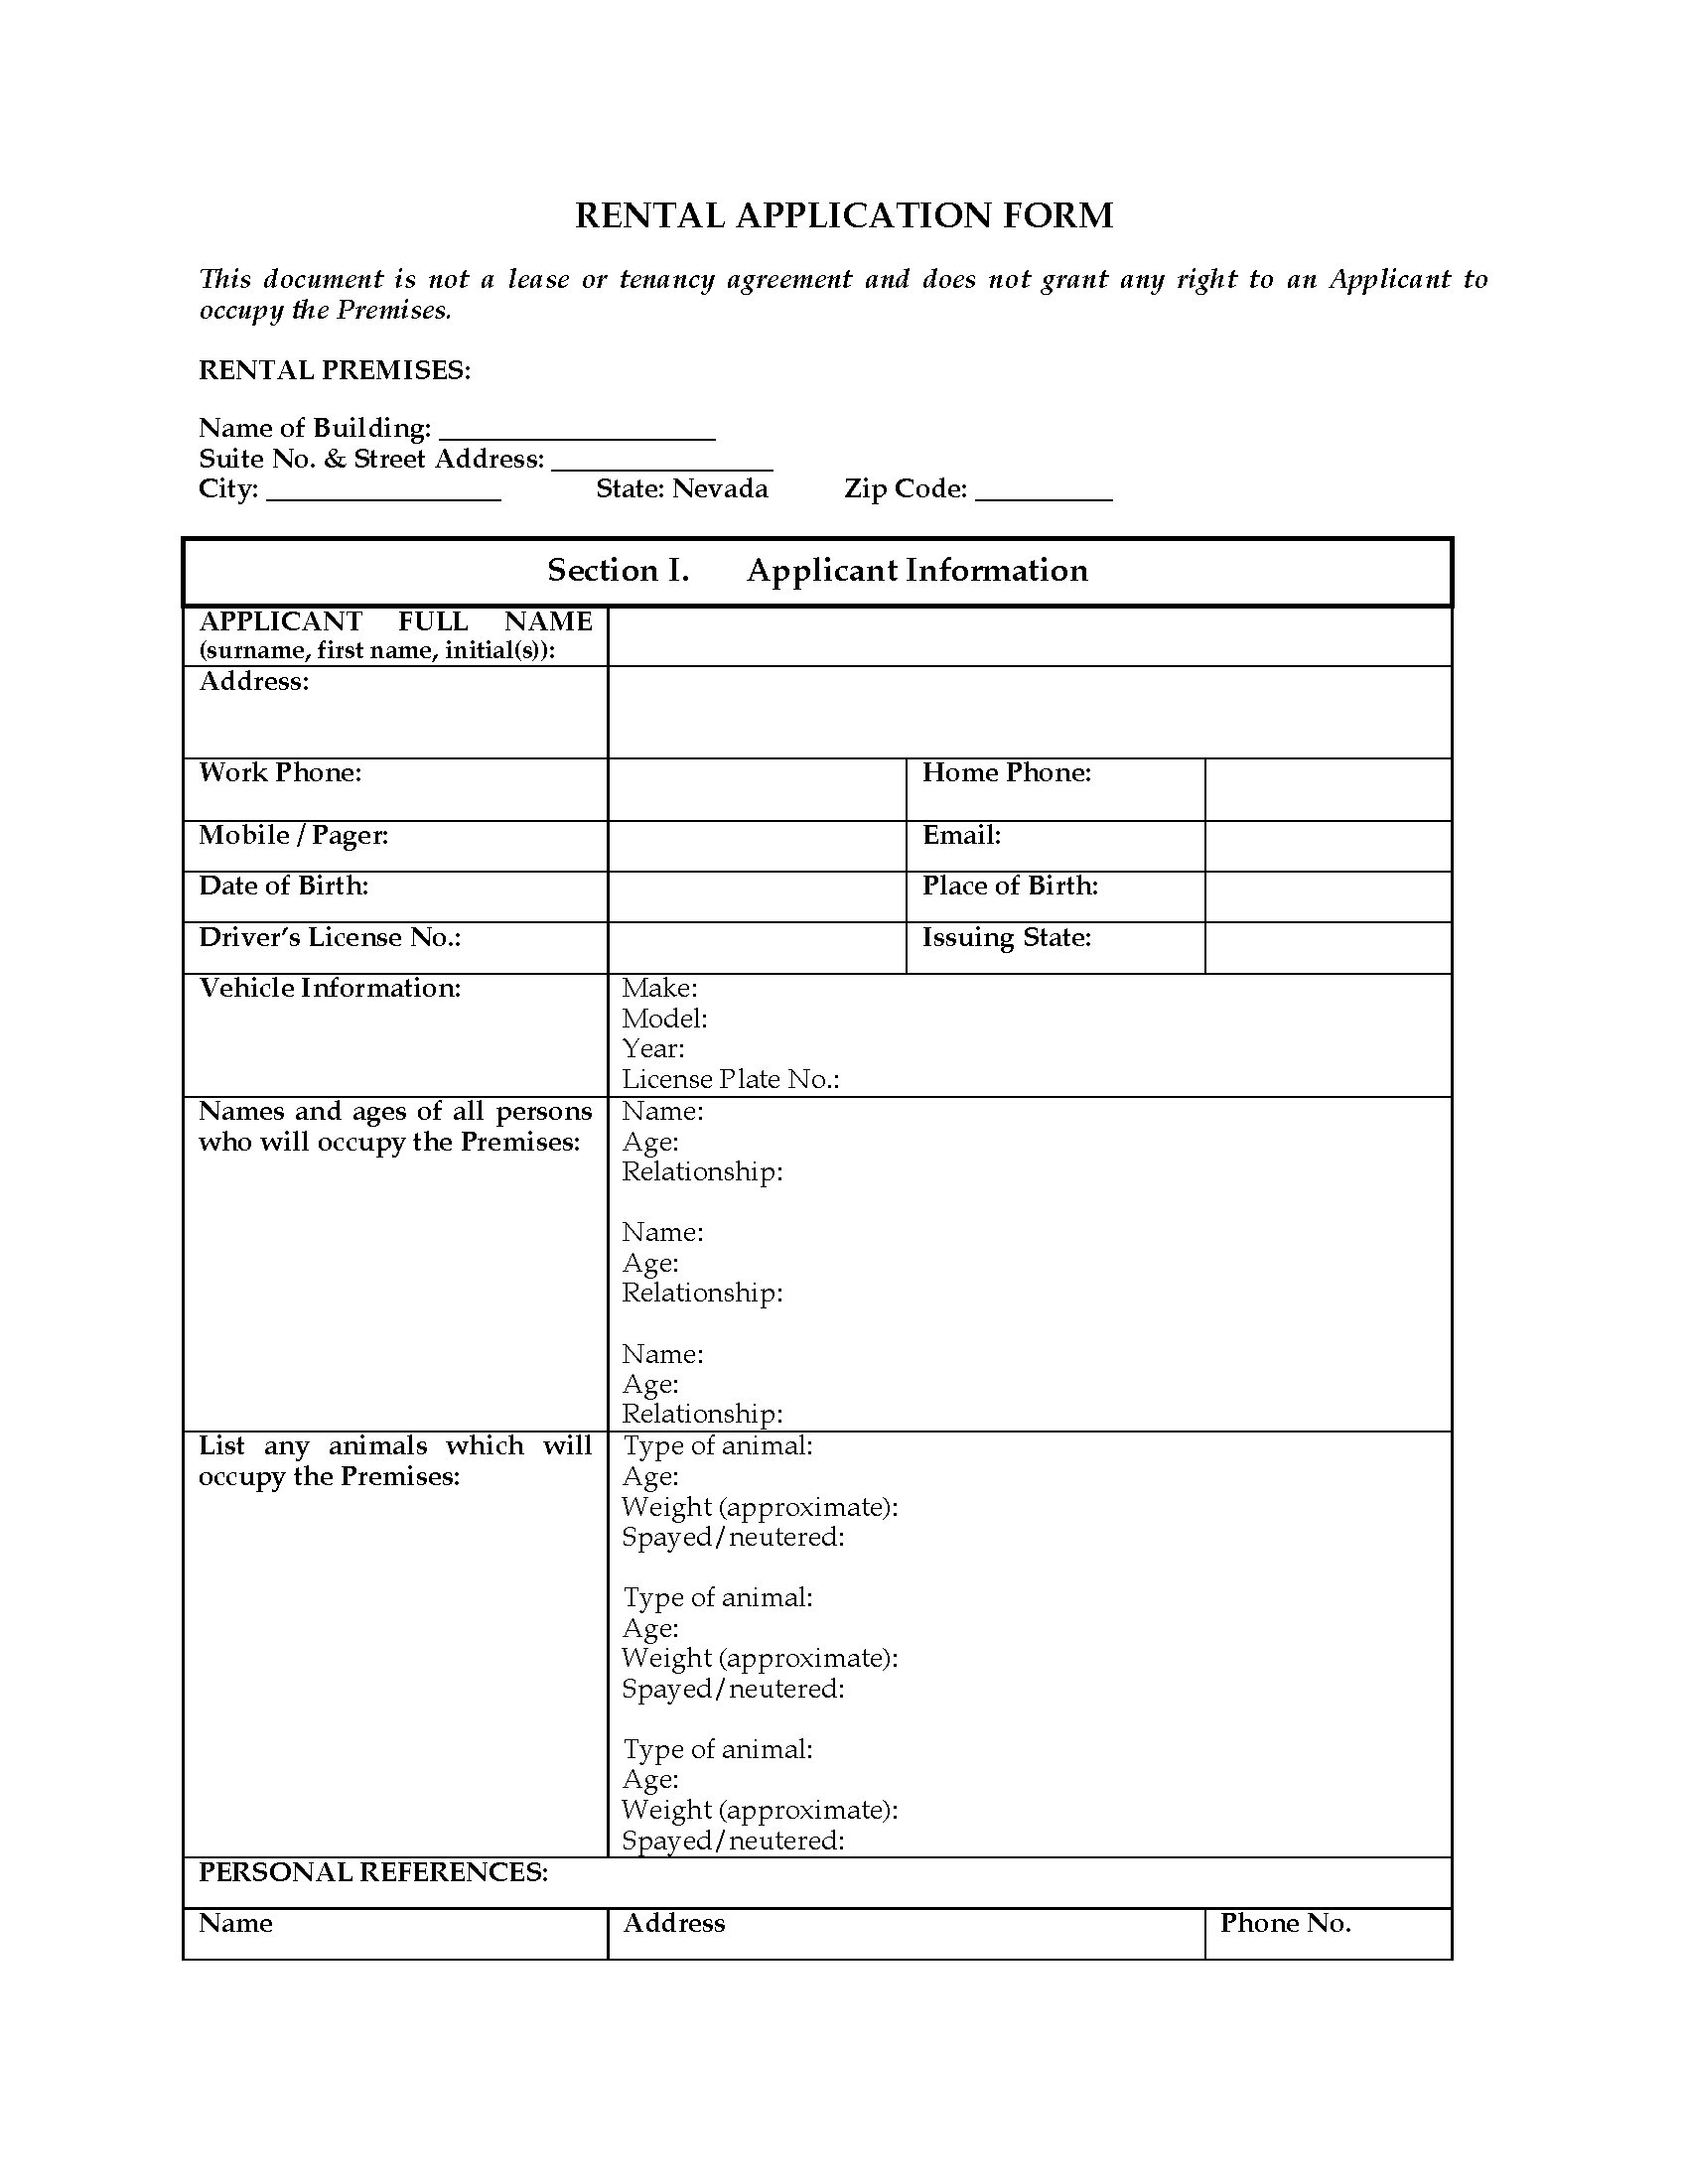 nevada-rental-application-form-legal-forms-and-business-templates